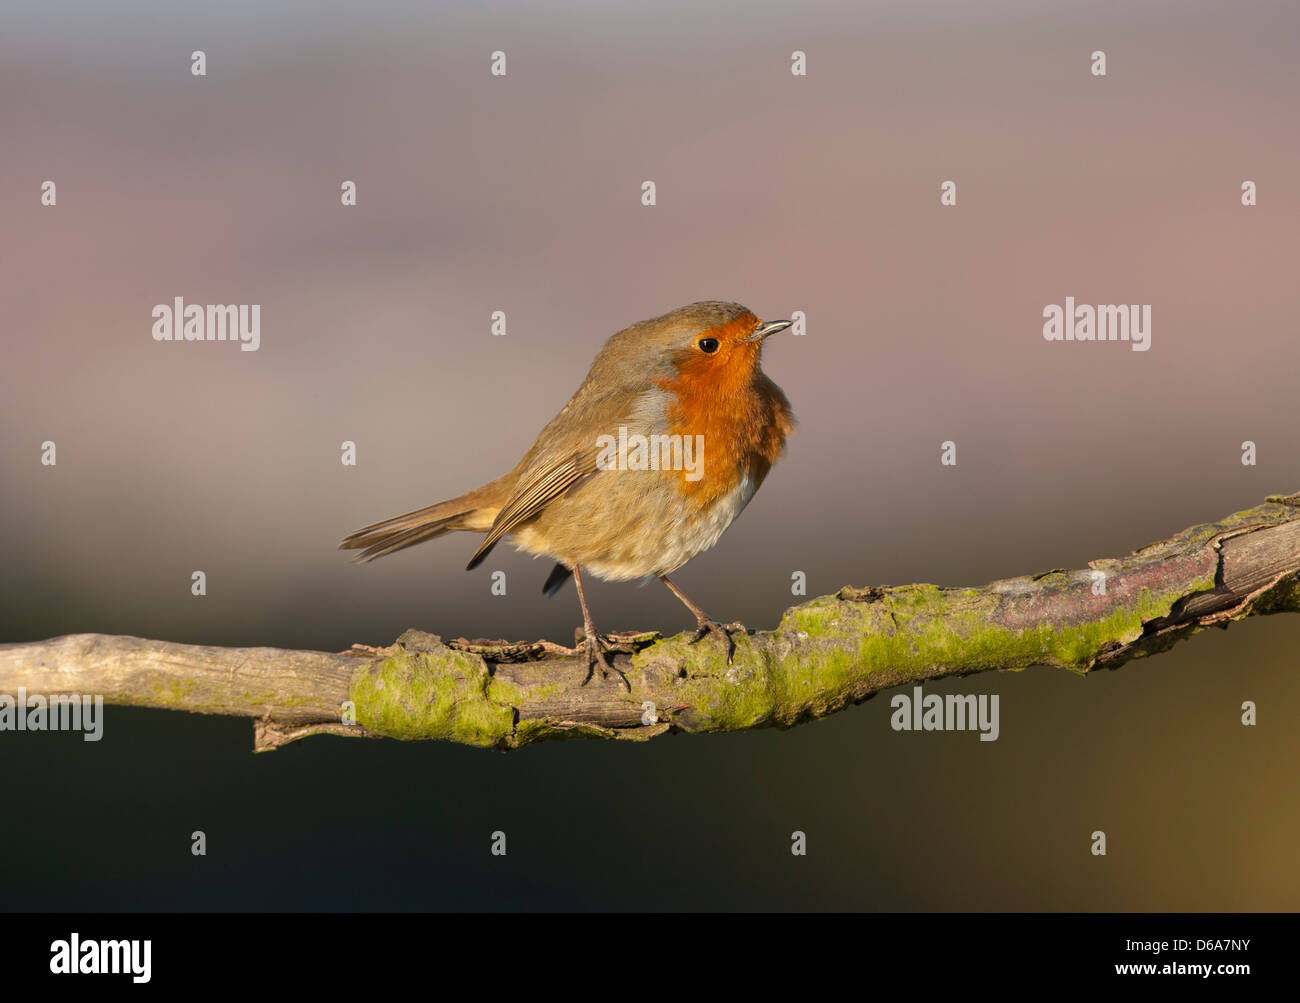 Erithacus rubecula Robin perched on a branch Stock Photo